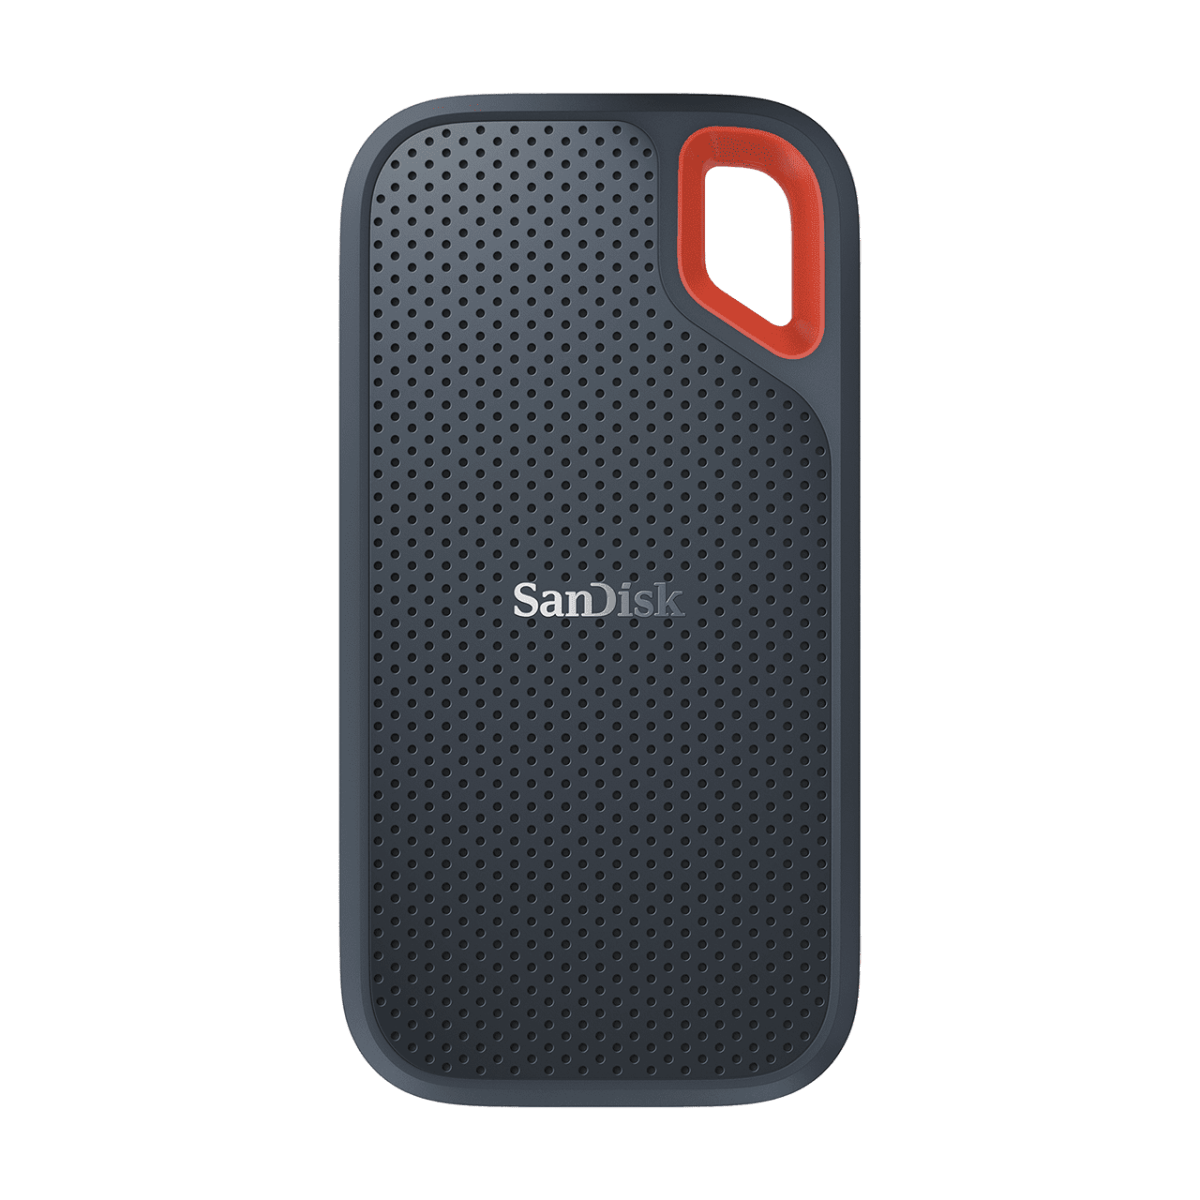 Extreme Usb 3 1 Ssd Angled Front.png.thumb .1280.1280 Sandisk &Lt;H1&Gt;Speed Up The Flow. Move Files Faster.&Lt;/H1&Gt; &Lt;Div Class=&Quot;Inheritpara Mb-4&Quot;&Gt; The Rugged Sandisk® Extreme Portable Ssd Delivers High-Speed Transfers With Up To 550Mb/S Read Speeds. This Makes It Perfect For Saving And Editing Hi-Res Photos And Videos. With An Ip55 Rating, It Also Stands Up To Rain, Splashes, Spills, And Dust. &Lt;/Div&Gt; &Lt;Strong&Gt;3-Year Sandisk Limited Warranty&Lt;/Strong&Gt; [Embed]Https://Youtu.be/On0B70Waom8[/Embed] Sandisk Extreme Portable Ssd 1 Tb Sandisk Extreme Portable Ssd 1 Tb (Rain, Splashes, Spills, And Dust Resistance)